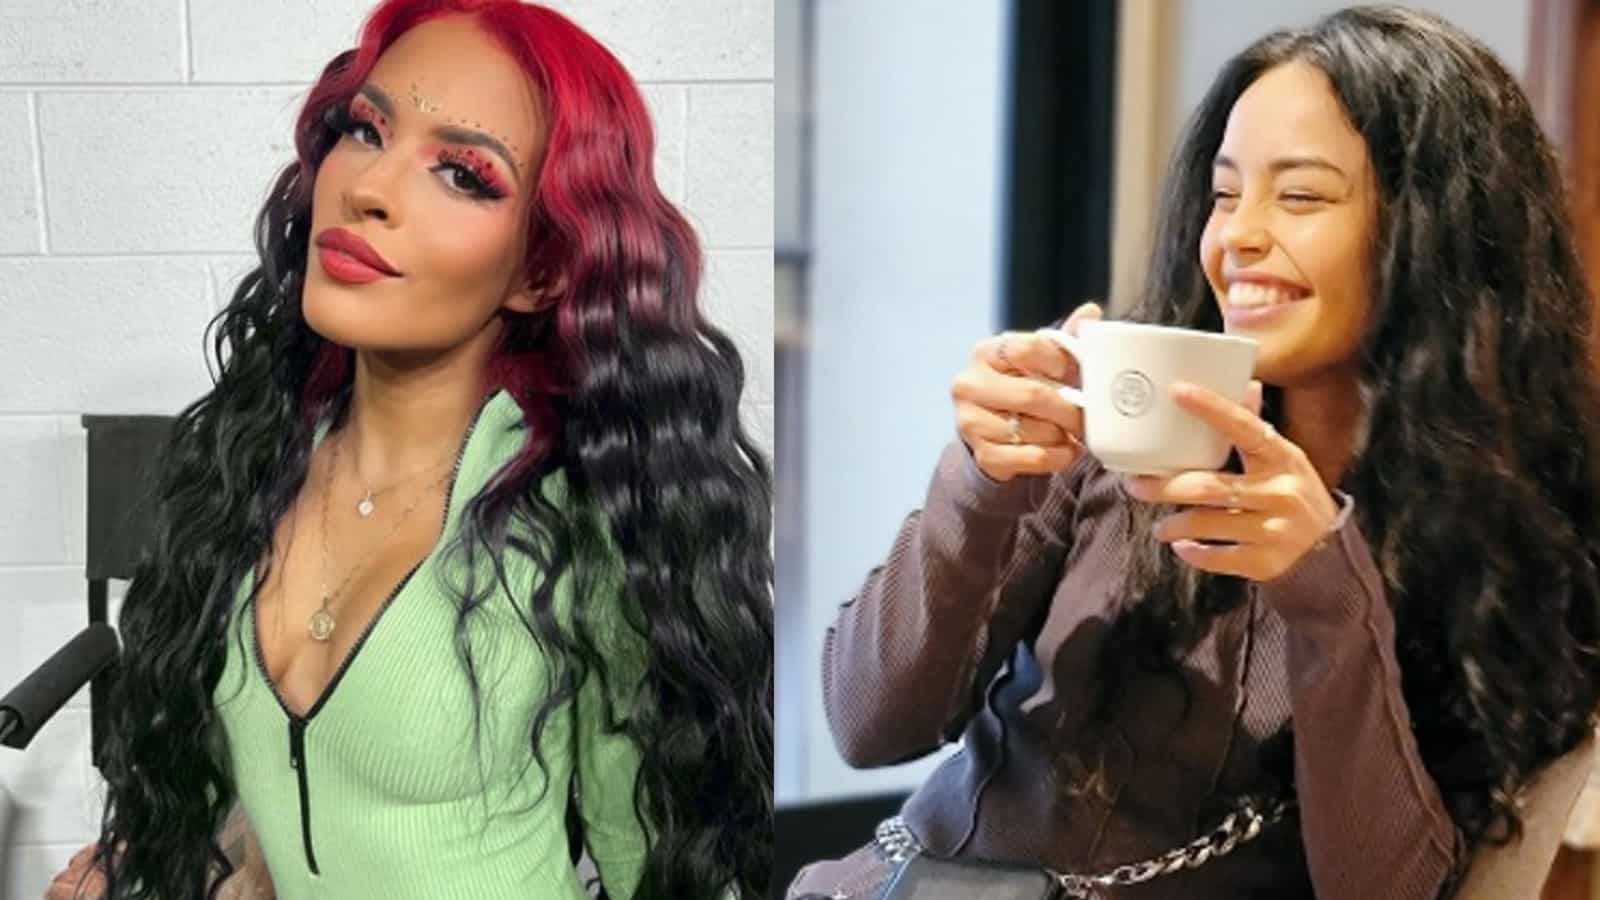 Zelina Vega and with Valkyrae drinking from teacup